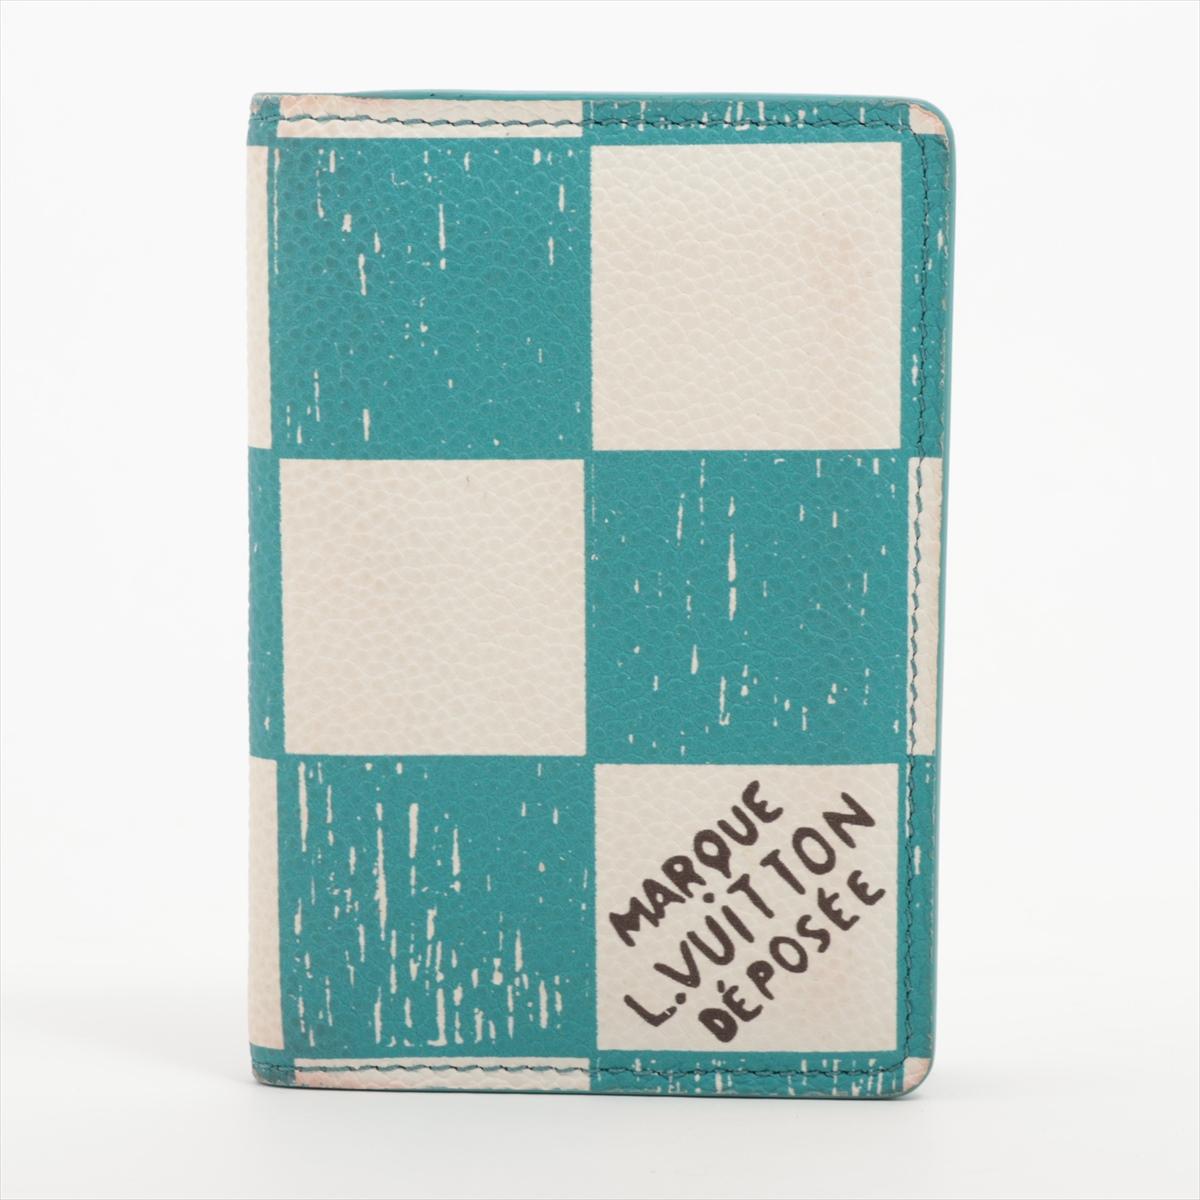 The Louis Vuitton Damier Pocket Organizer Card Case in Turquoise is a stylish and compact accessory that effortlessly combines functionality with a pop of color. Crafted with precision, the card case features the iconic Damier pattern in a vibrant